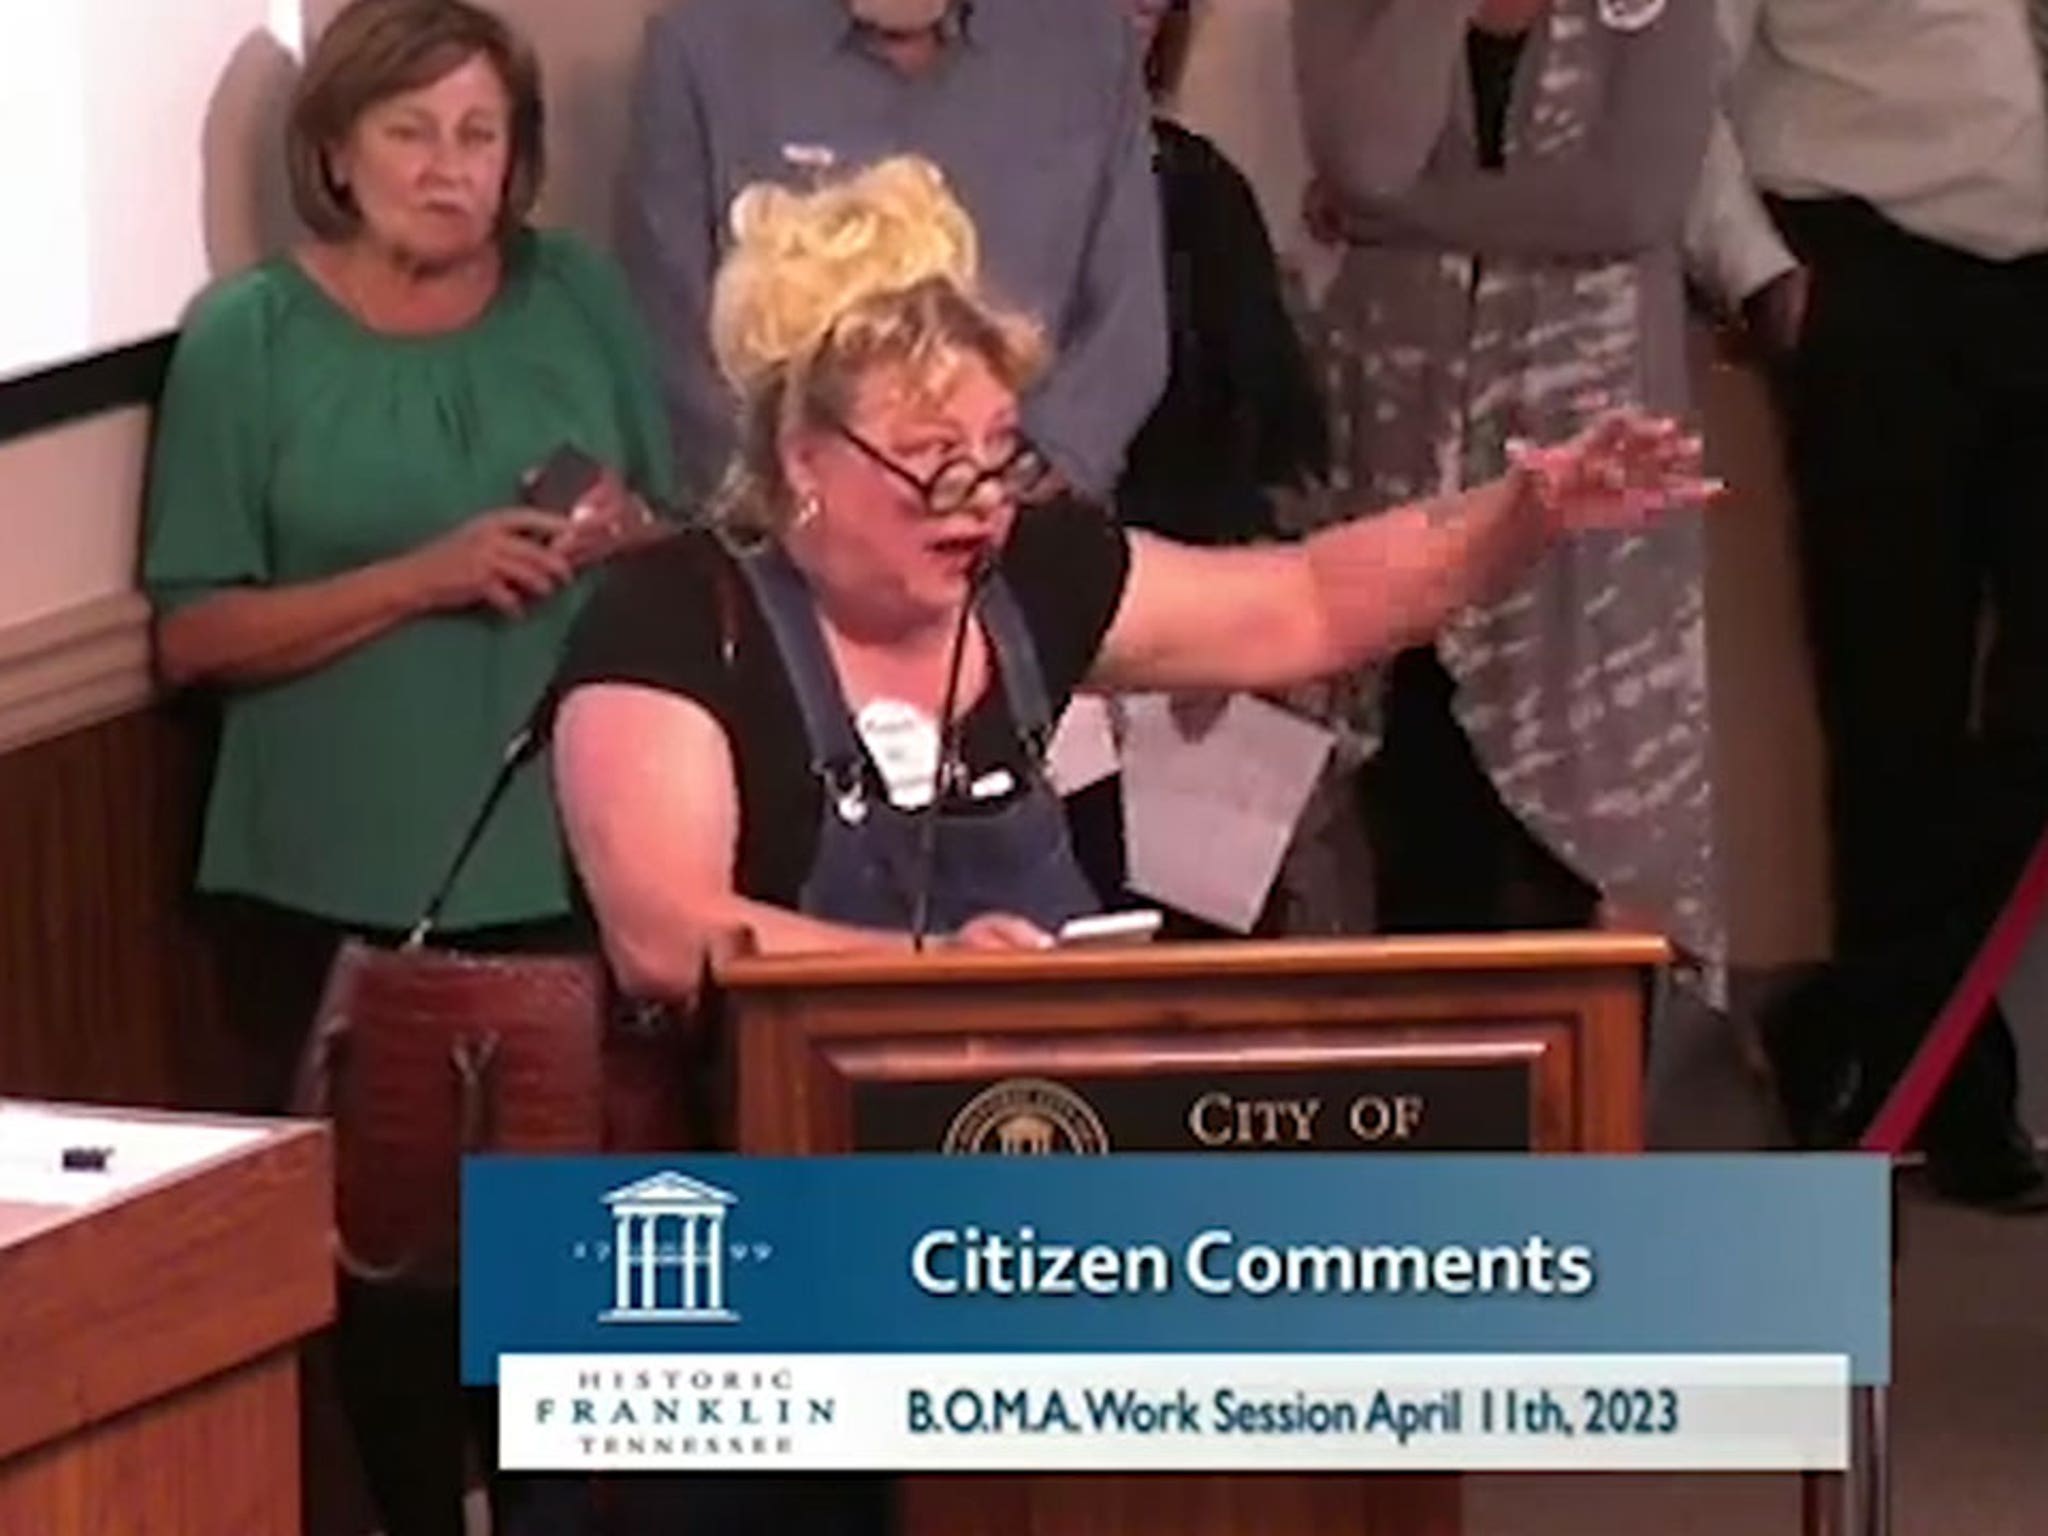 Former SNL Star Unleashes Homophobic Rant at Tennessee City Council Meeting